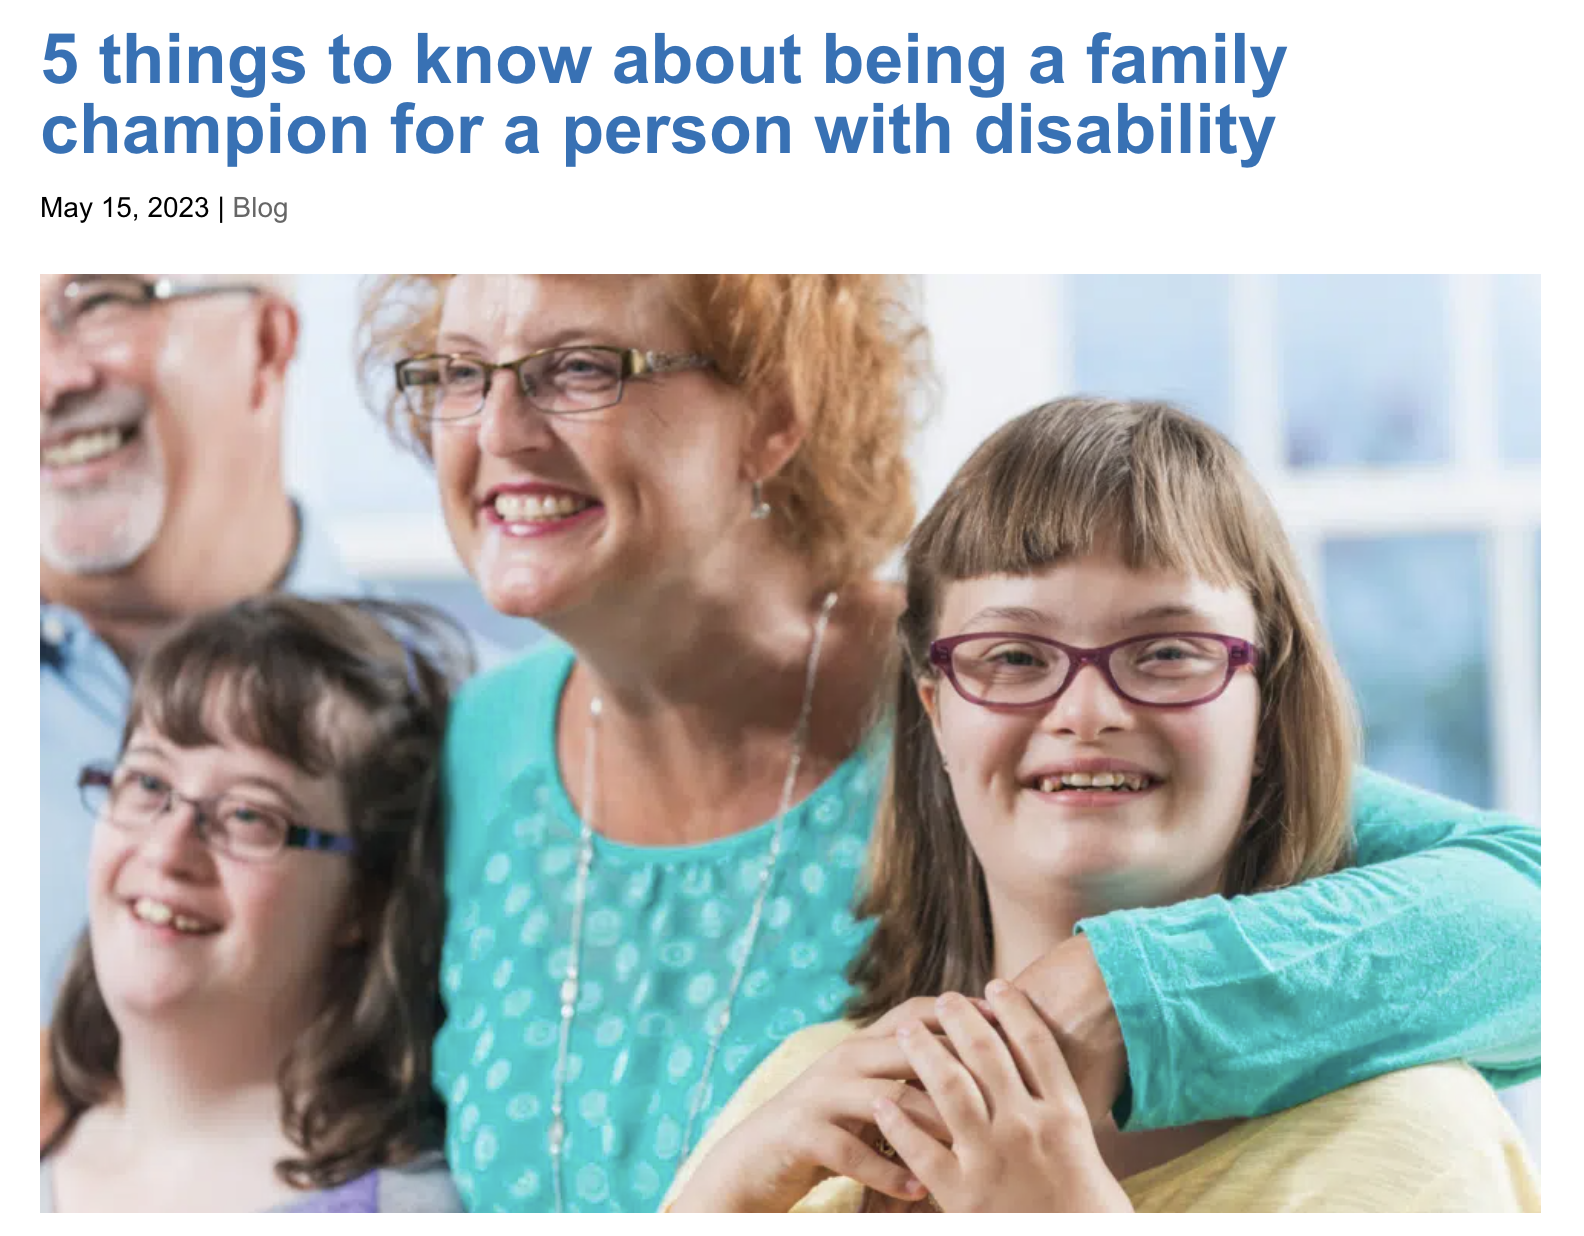 5 things to know about being a family champion for a person with disability